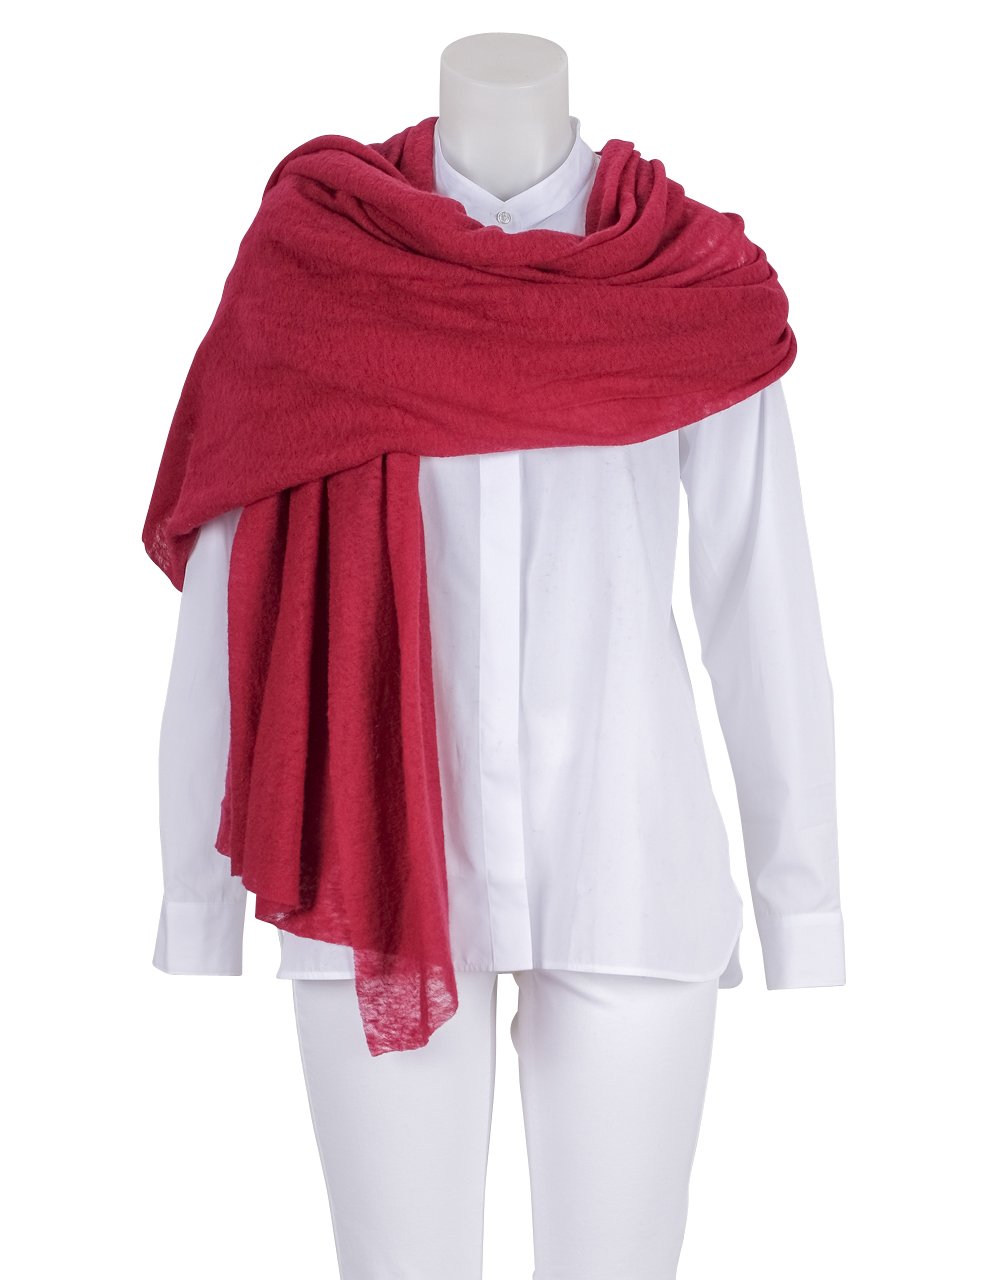 Pin1876 - by Botto Giuseppe - Cashmere-Schal rot